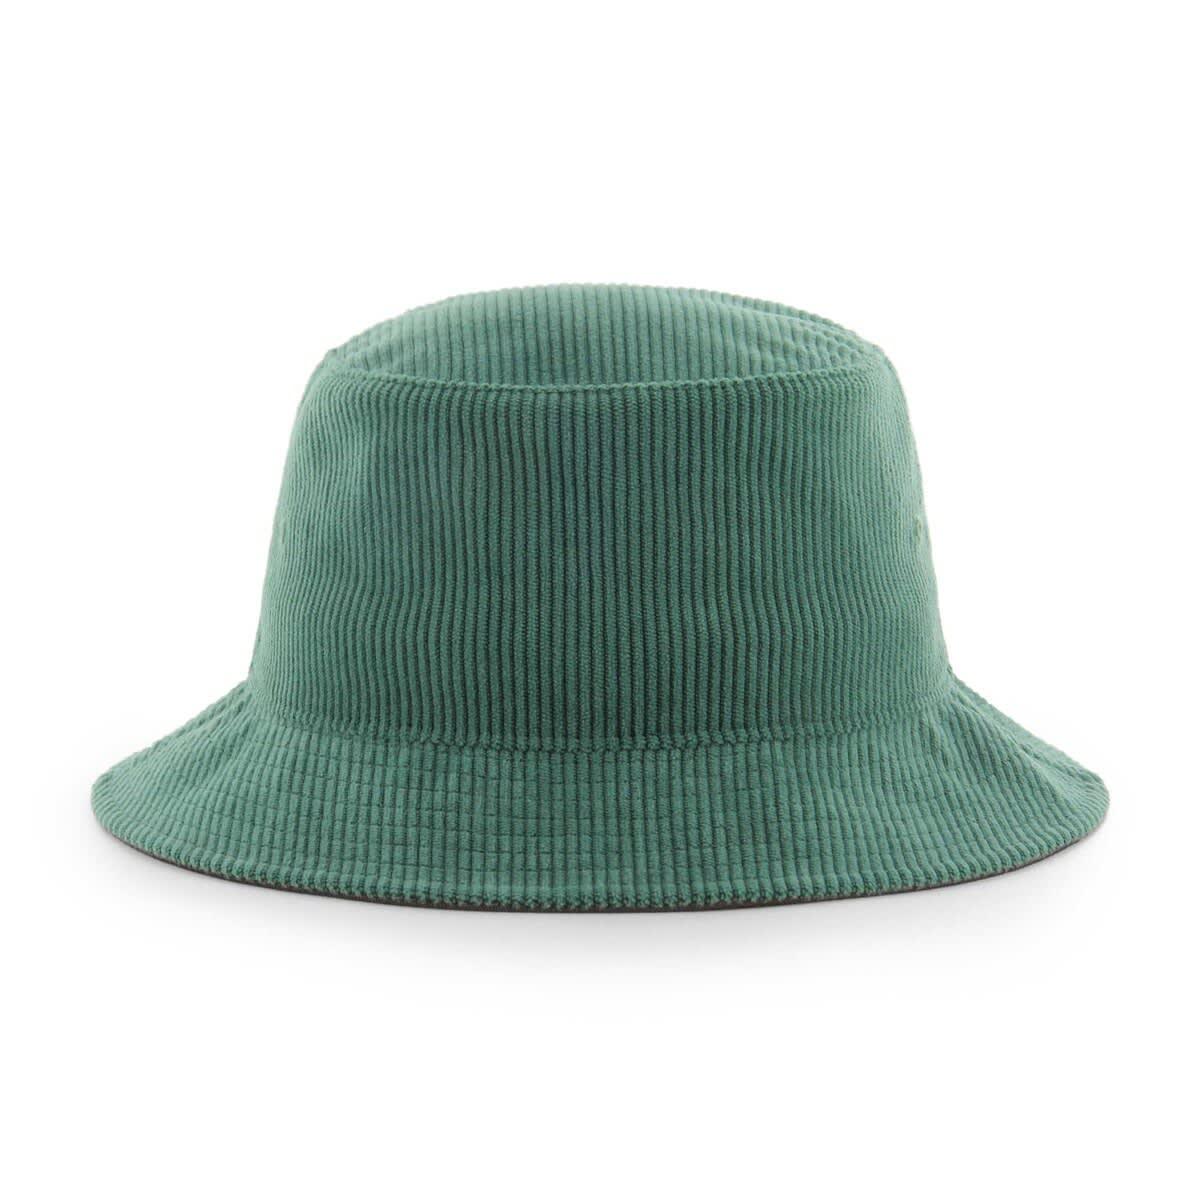 Hat Bucket Men Lyst New for Jets At Cord Thick York Green 47 Nordstrom in |